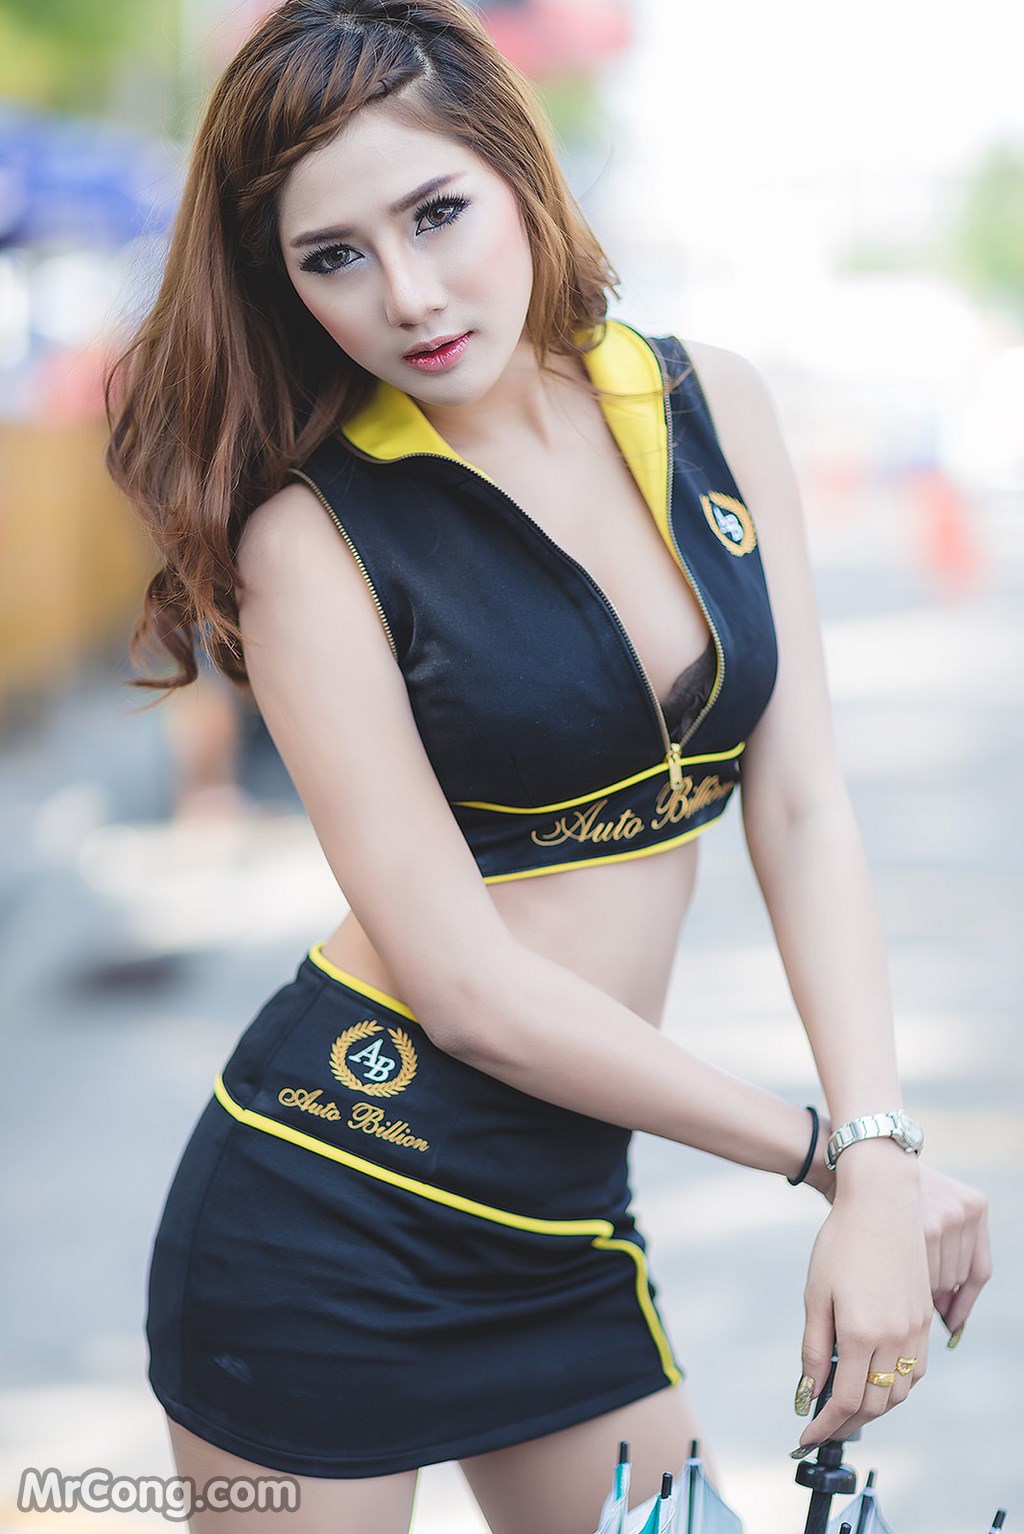 Beautiful and sexy Thai girls - Part 2 (454 photos)